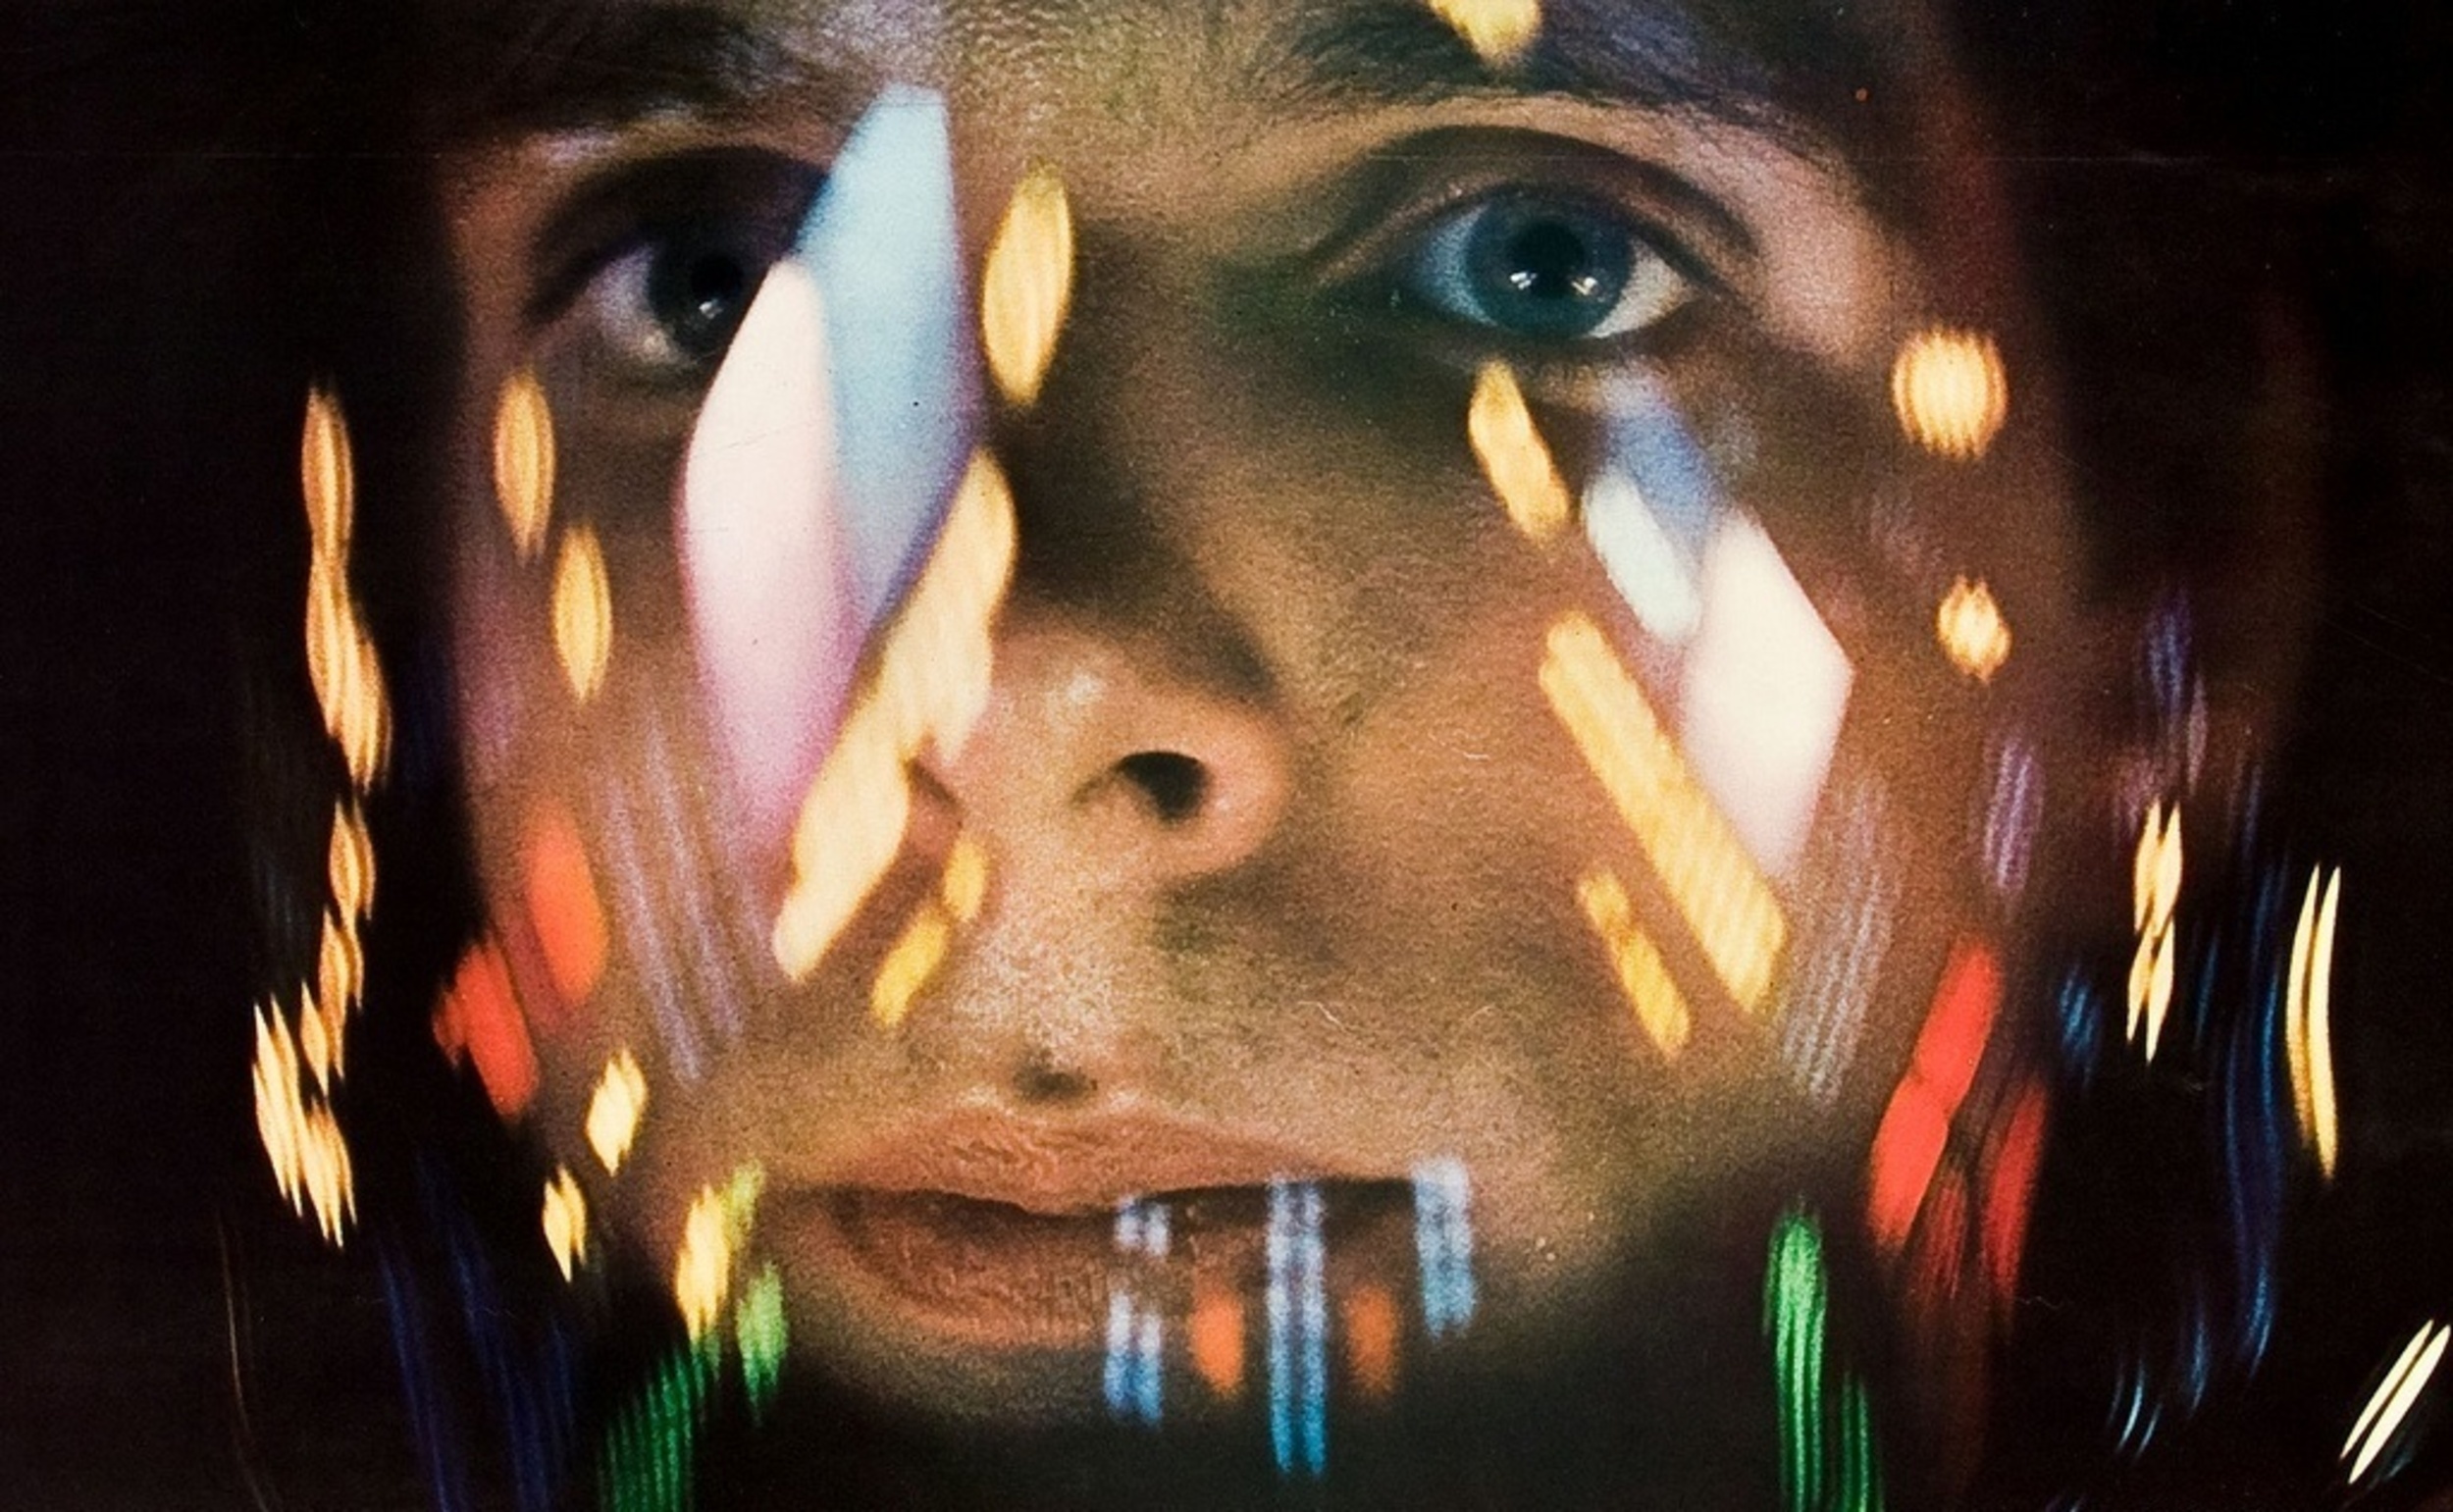 <p>Stanley Kubrick’s <span><em>2001: A Space Odyssey</em> </span>remains one of the most extraordinary pieces of science fiction filmmaking in the genre's history. Sweeping, operatic, and philosophically rich, it is remarkably accurate in its depictions of science. Since its release, it has held up remarkably well, particularly when depicting space travel. Several experts, a noted astrophysicist, <a href="https://www.inverse.com/culture/2001-a-space-odyssey-55-year-anniversary-nasa-science-accuracy"><span>have praised the film’s accuracy</span></a>. It is thus one of those rare films that never sacrifices cinematic artistry for scientific precision but instead finds a remarkable and powerful balance between these two elements. </p><p><a href='https://www.msn.com/en-us/community/channel/vid-cj9pqbr0vn9in2b6ddcd8sfgpfq6x6utp44fssrv6mc2gtybw0us'>Did you enjoy this slideshow? Follow us on MSN to see more of our exclusive entertainment content.</a></p>